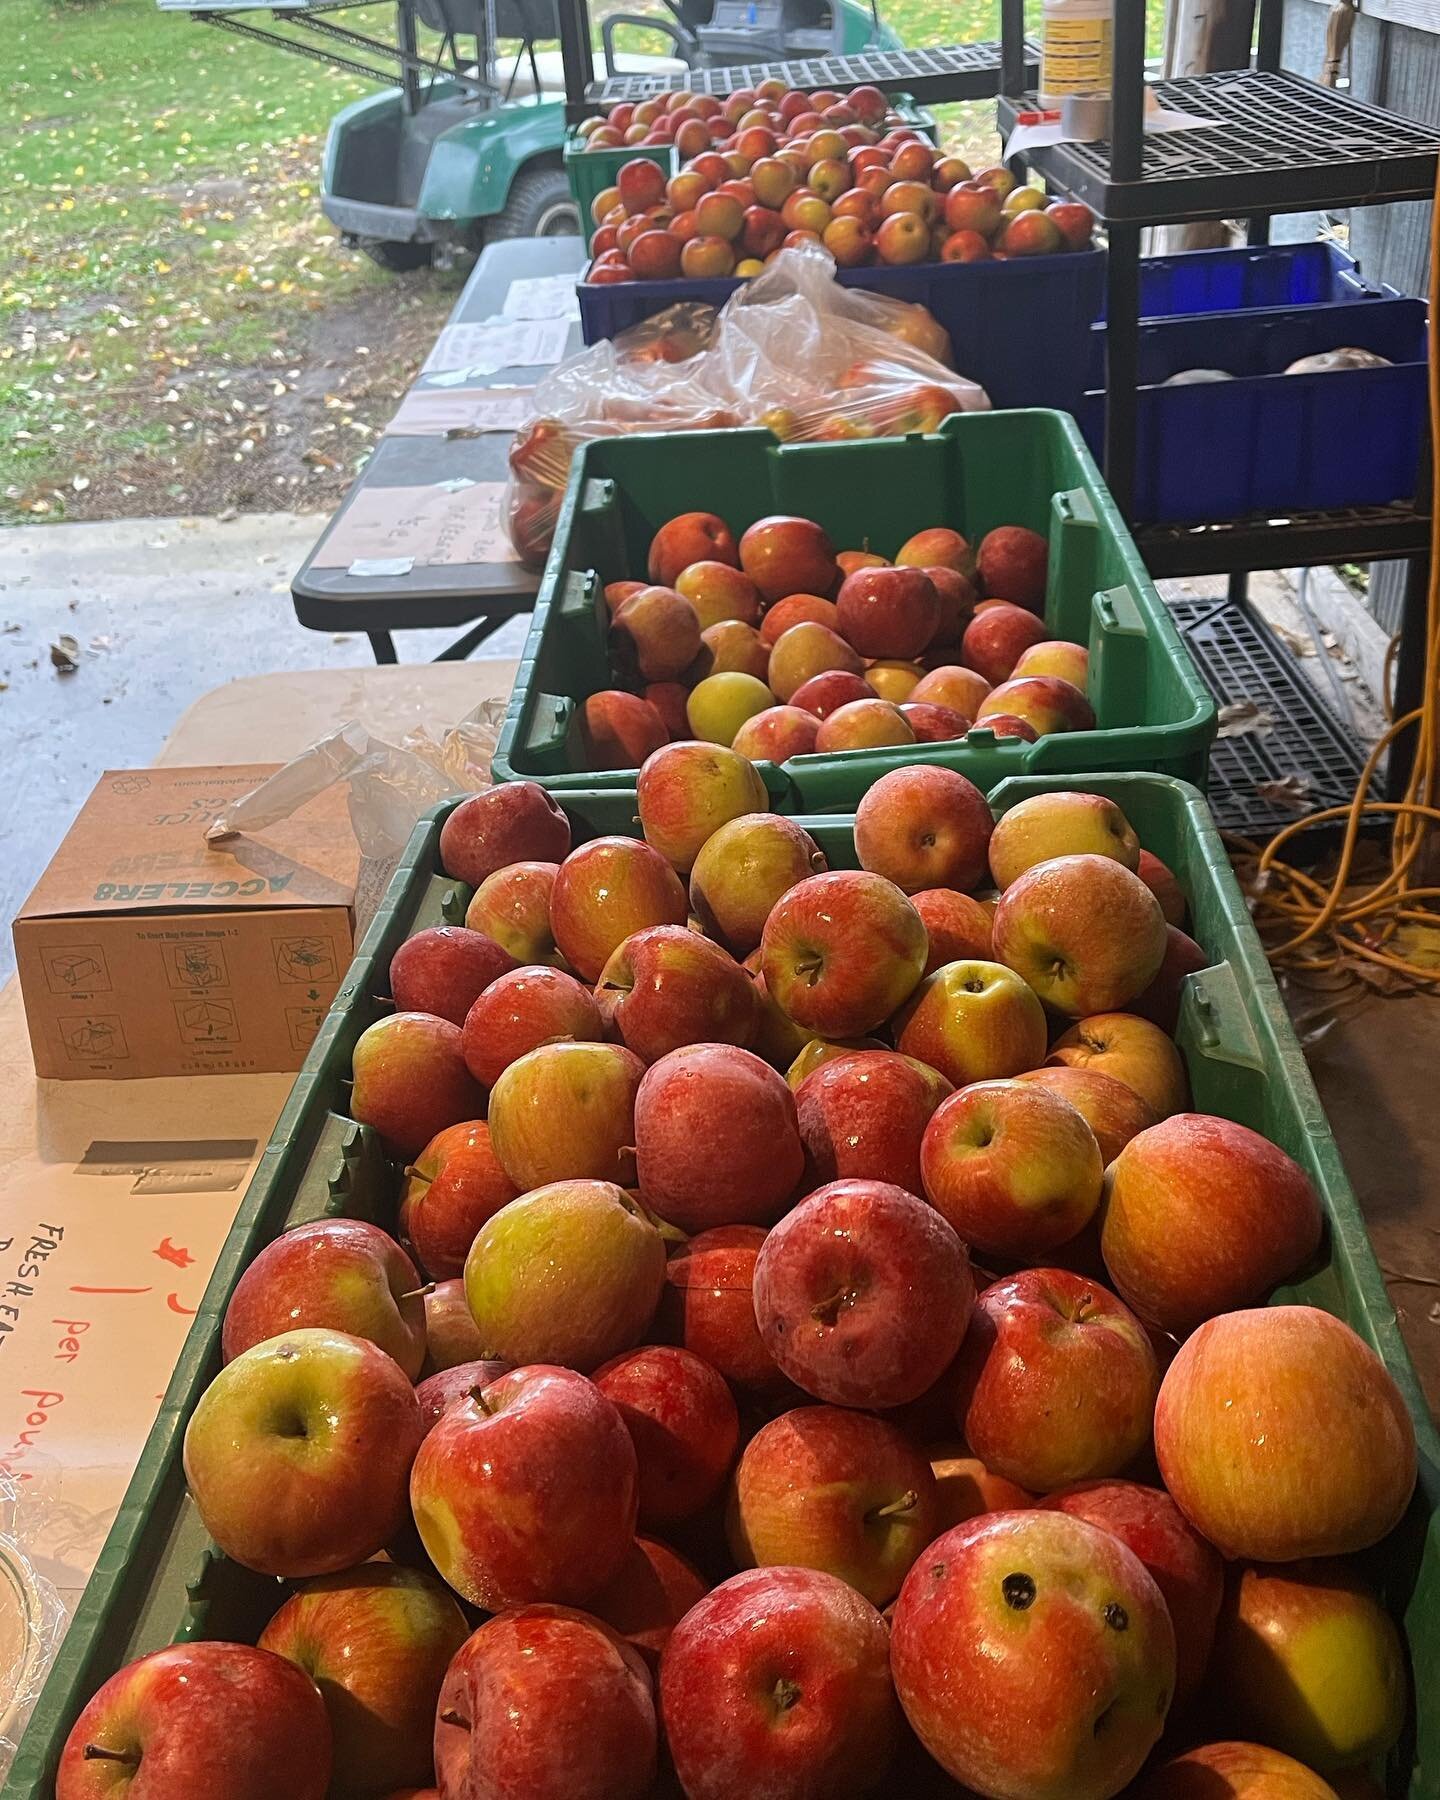 Still lots of Regents and Haralson apples for sale on the farm for one dollar per pound all this week. For the bargain hunters we have small apples for just $.50 per pound. They are great size for young children to eat. 
We pick them as late as possi